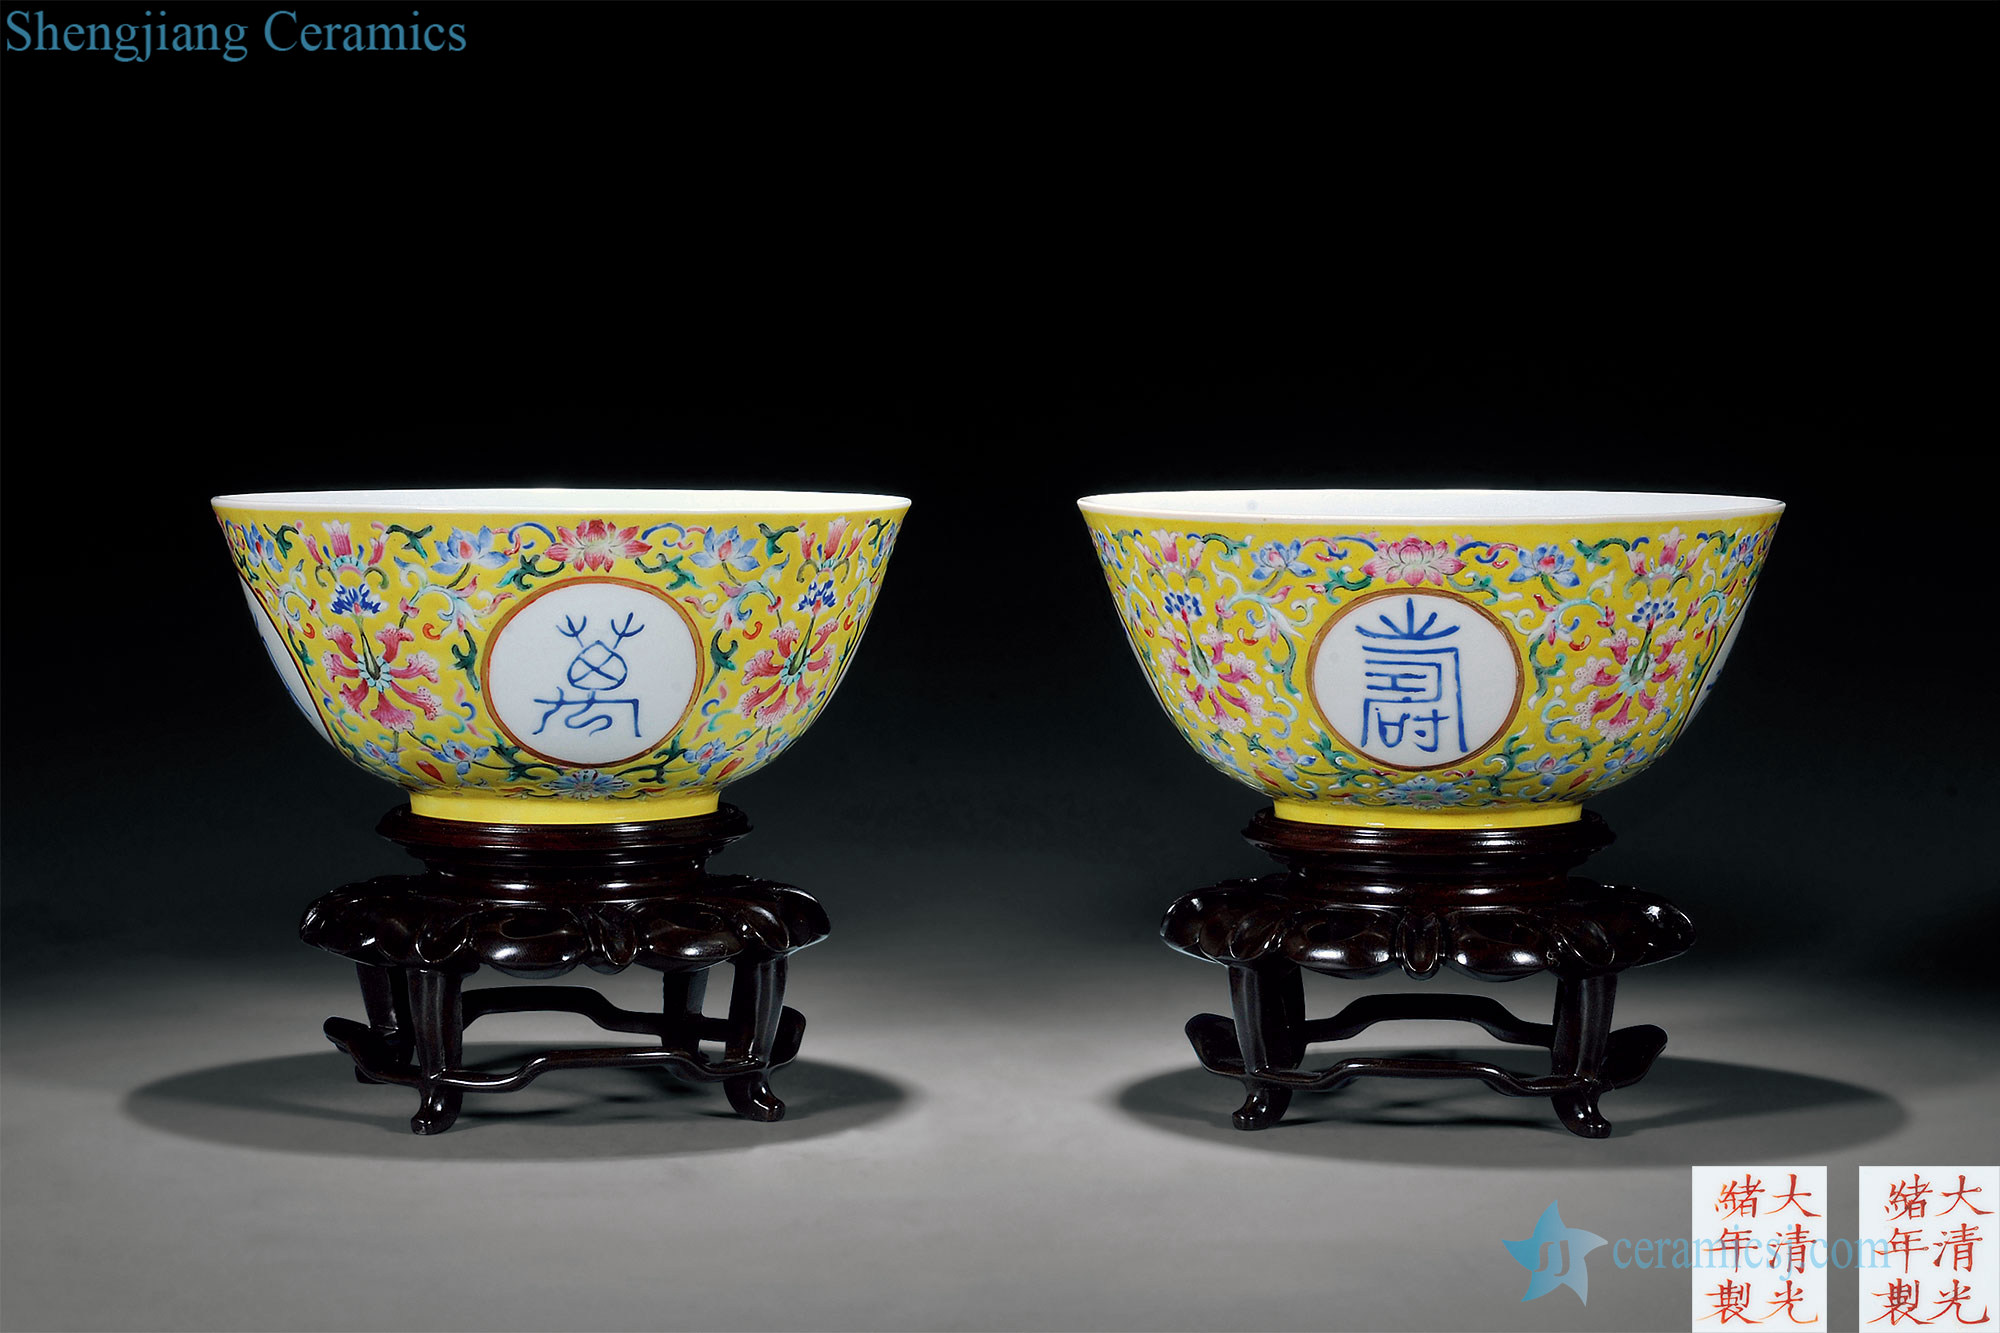 Qing guangxu To pastel yellow tie up lotus flower medallion stays in bowl (a)